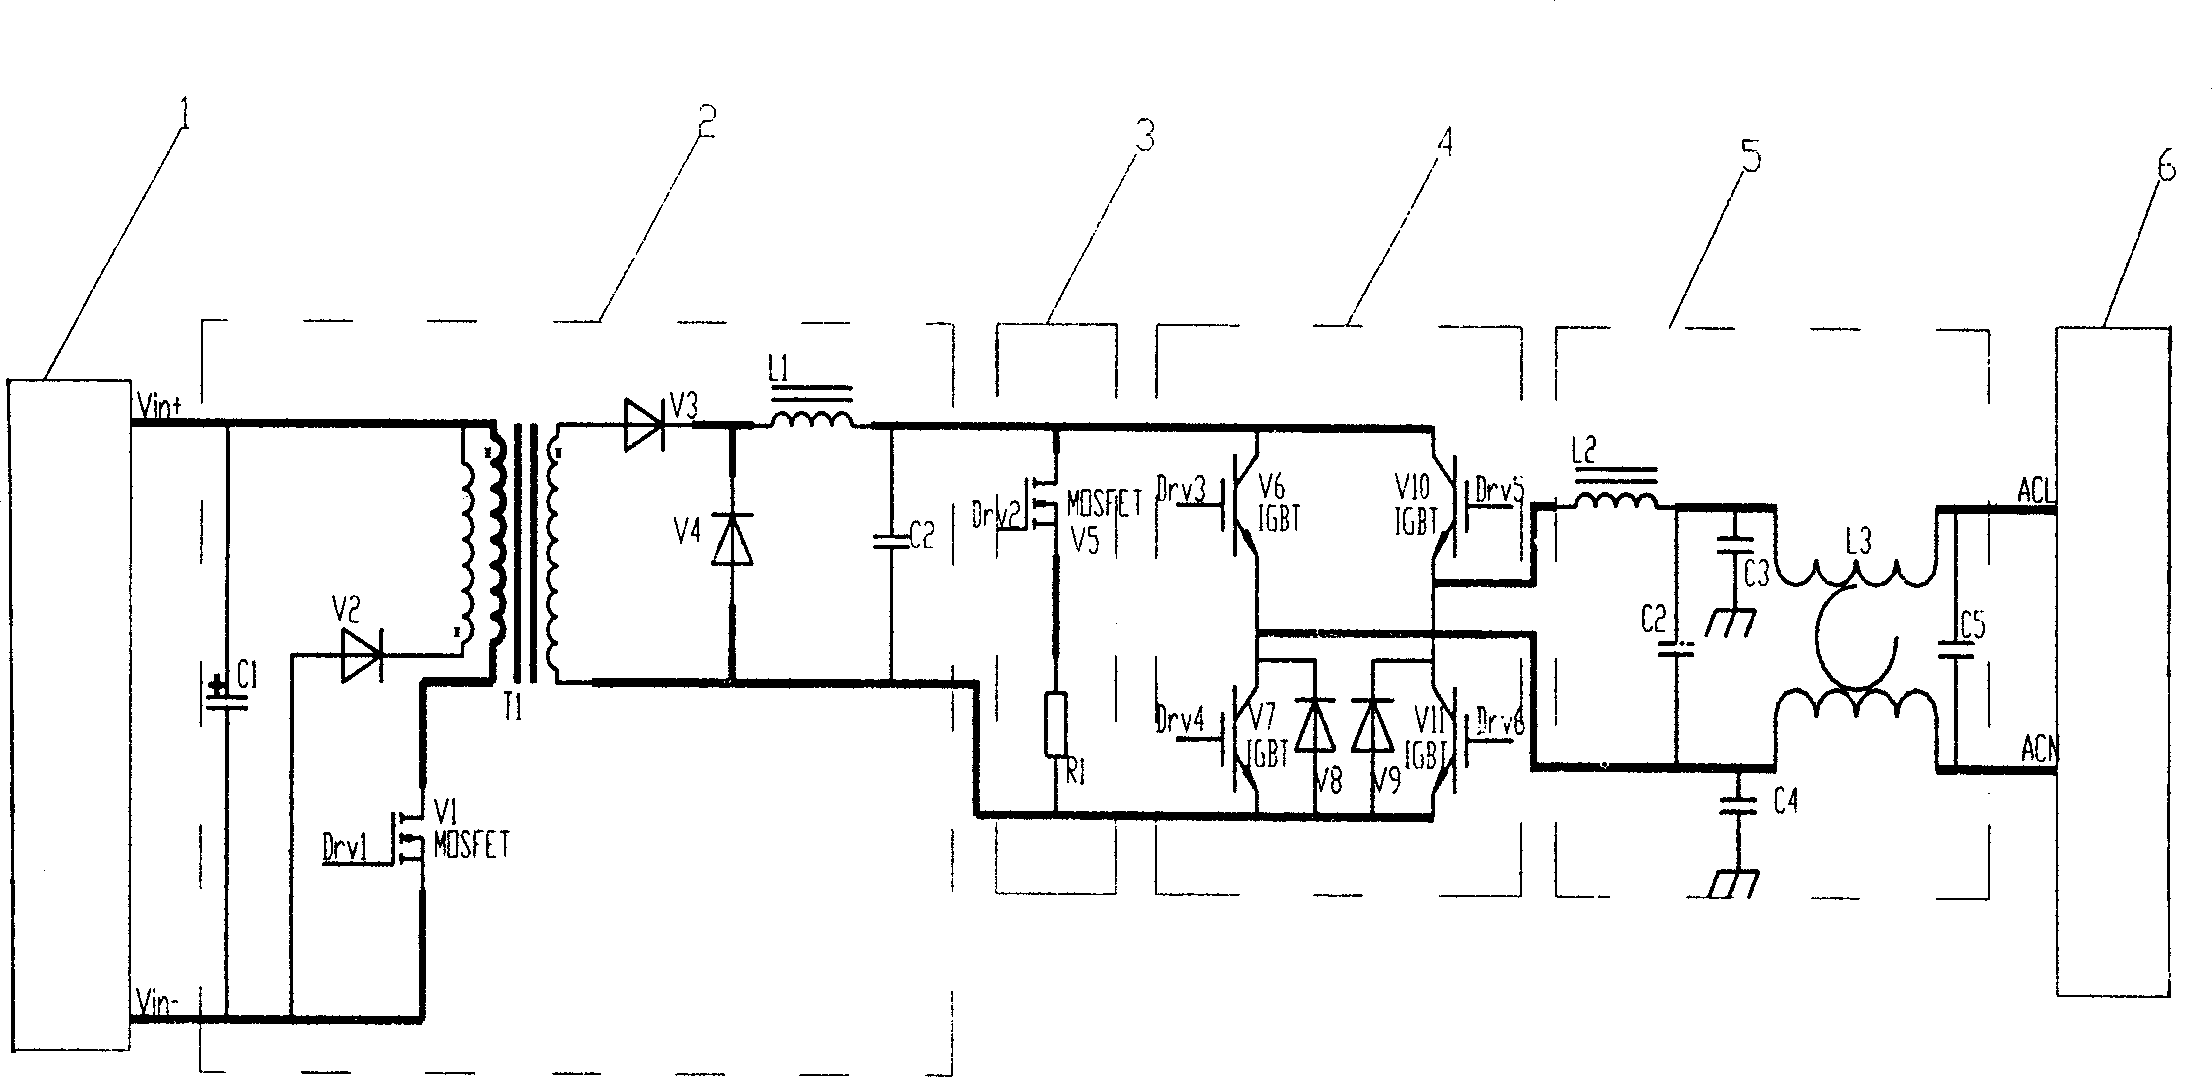 Single HF power conversion and dynamically pre-loaded sinusoidal inverter circuit